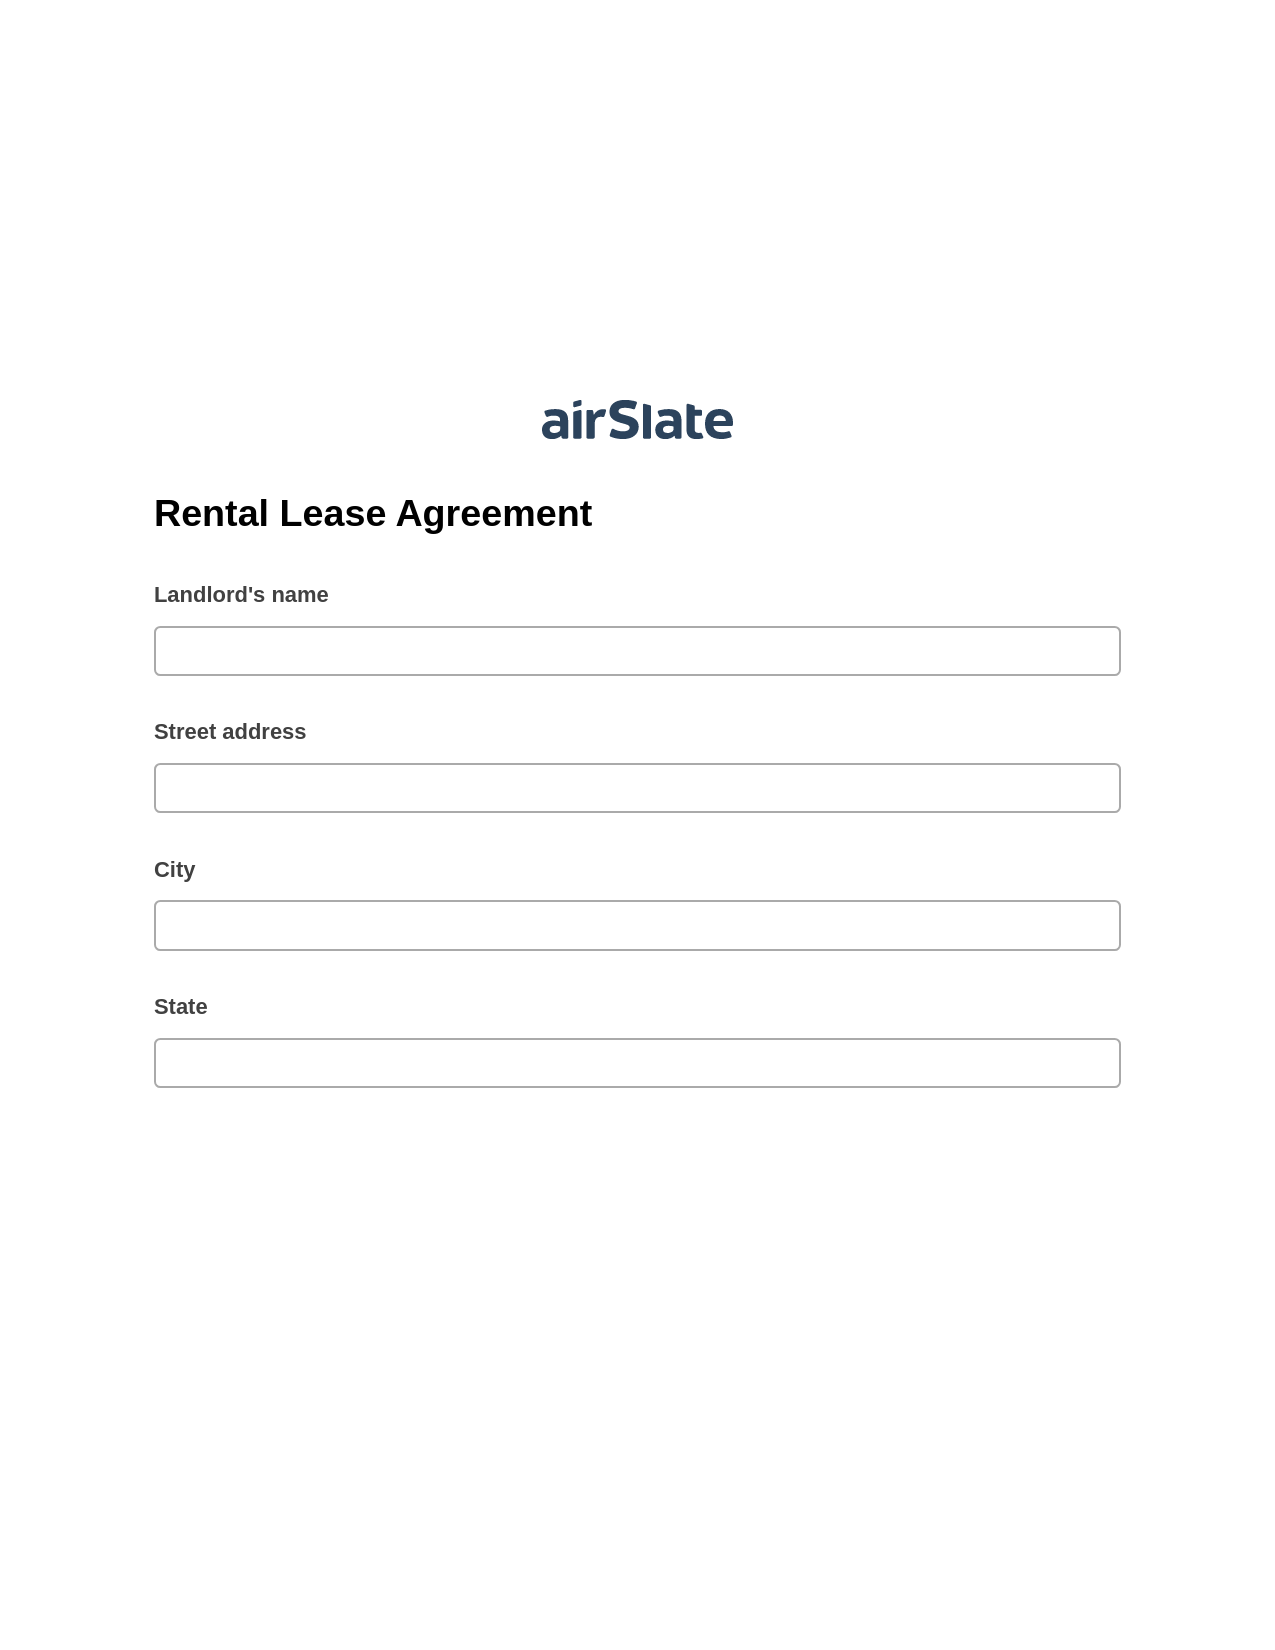 Rental Lease Agreement Pre-fill Dropdown from Airtable, Invoke Salesforce Process Bot, Post-finish Document Bot